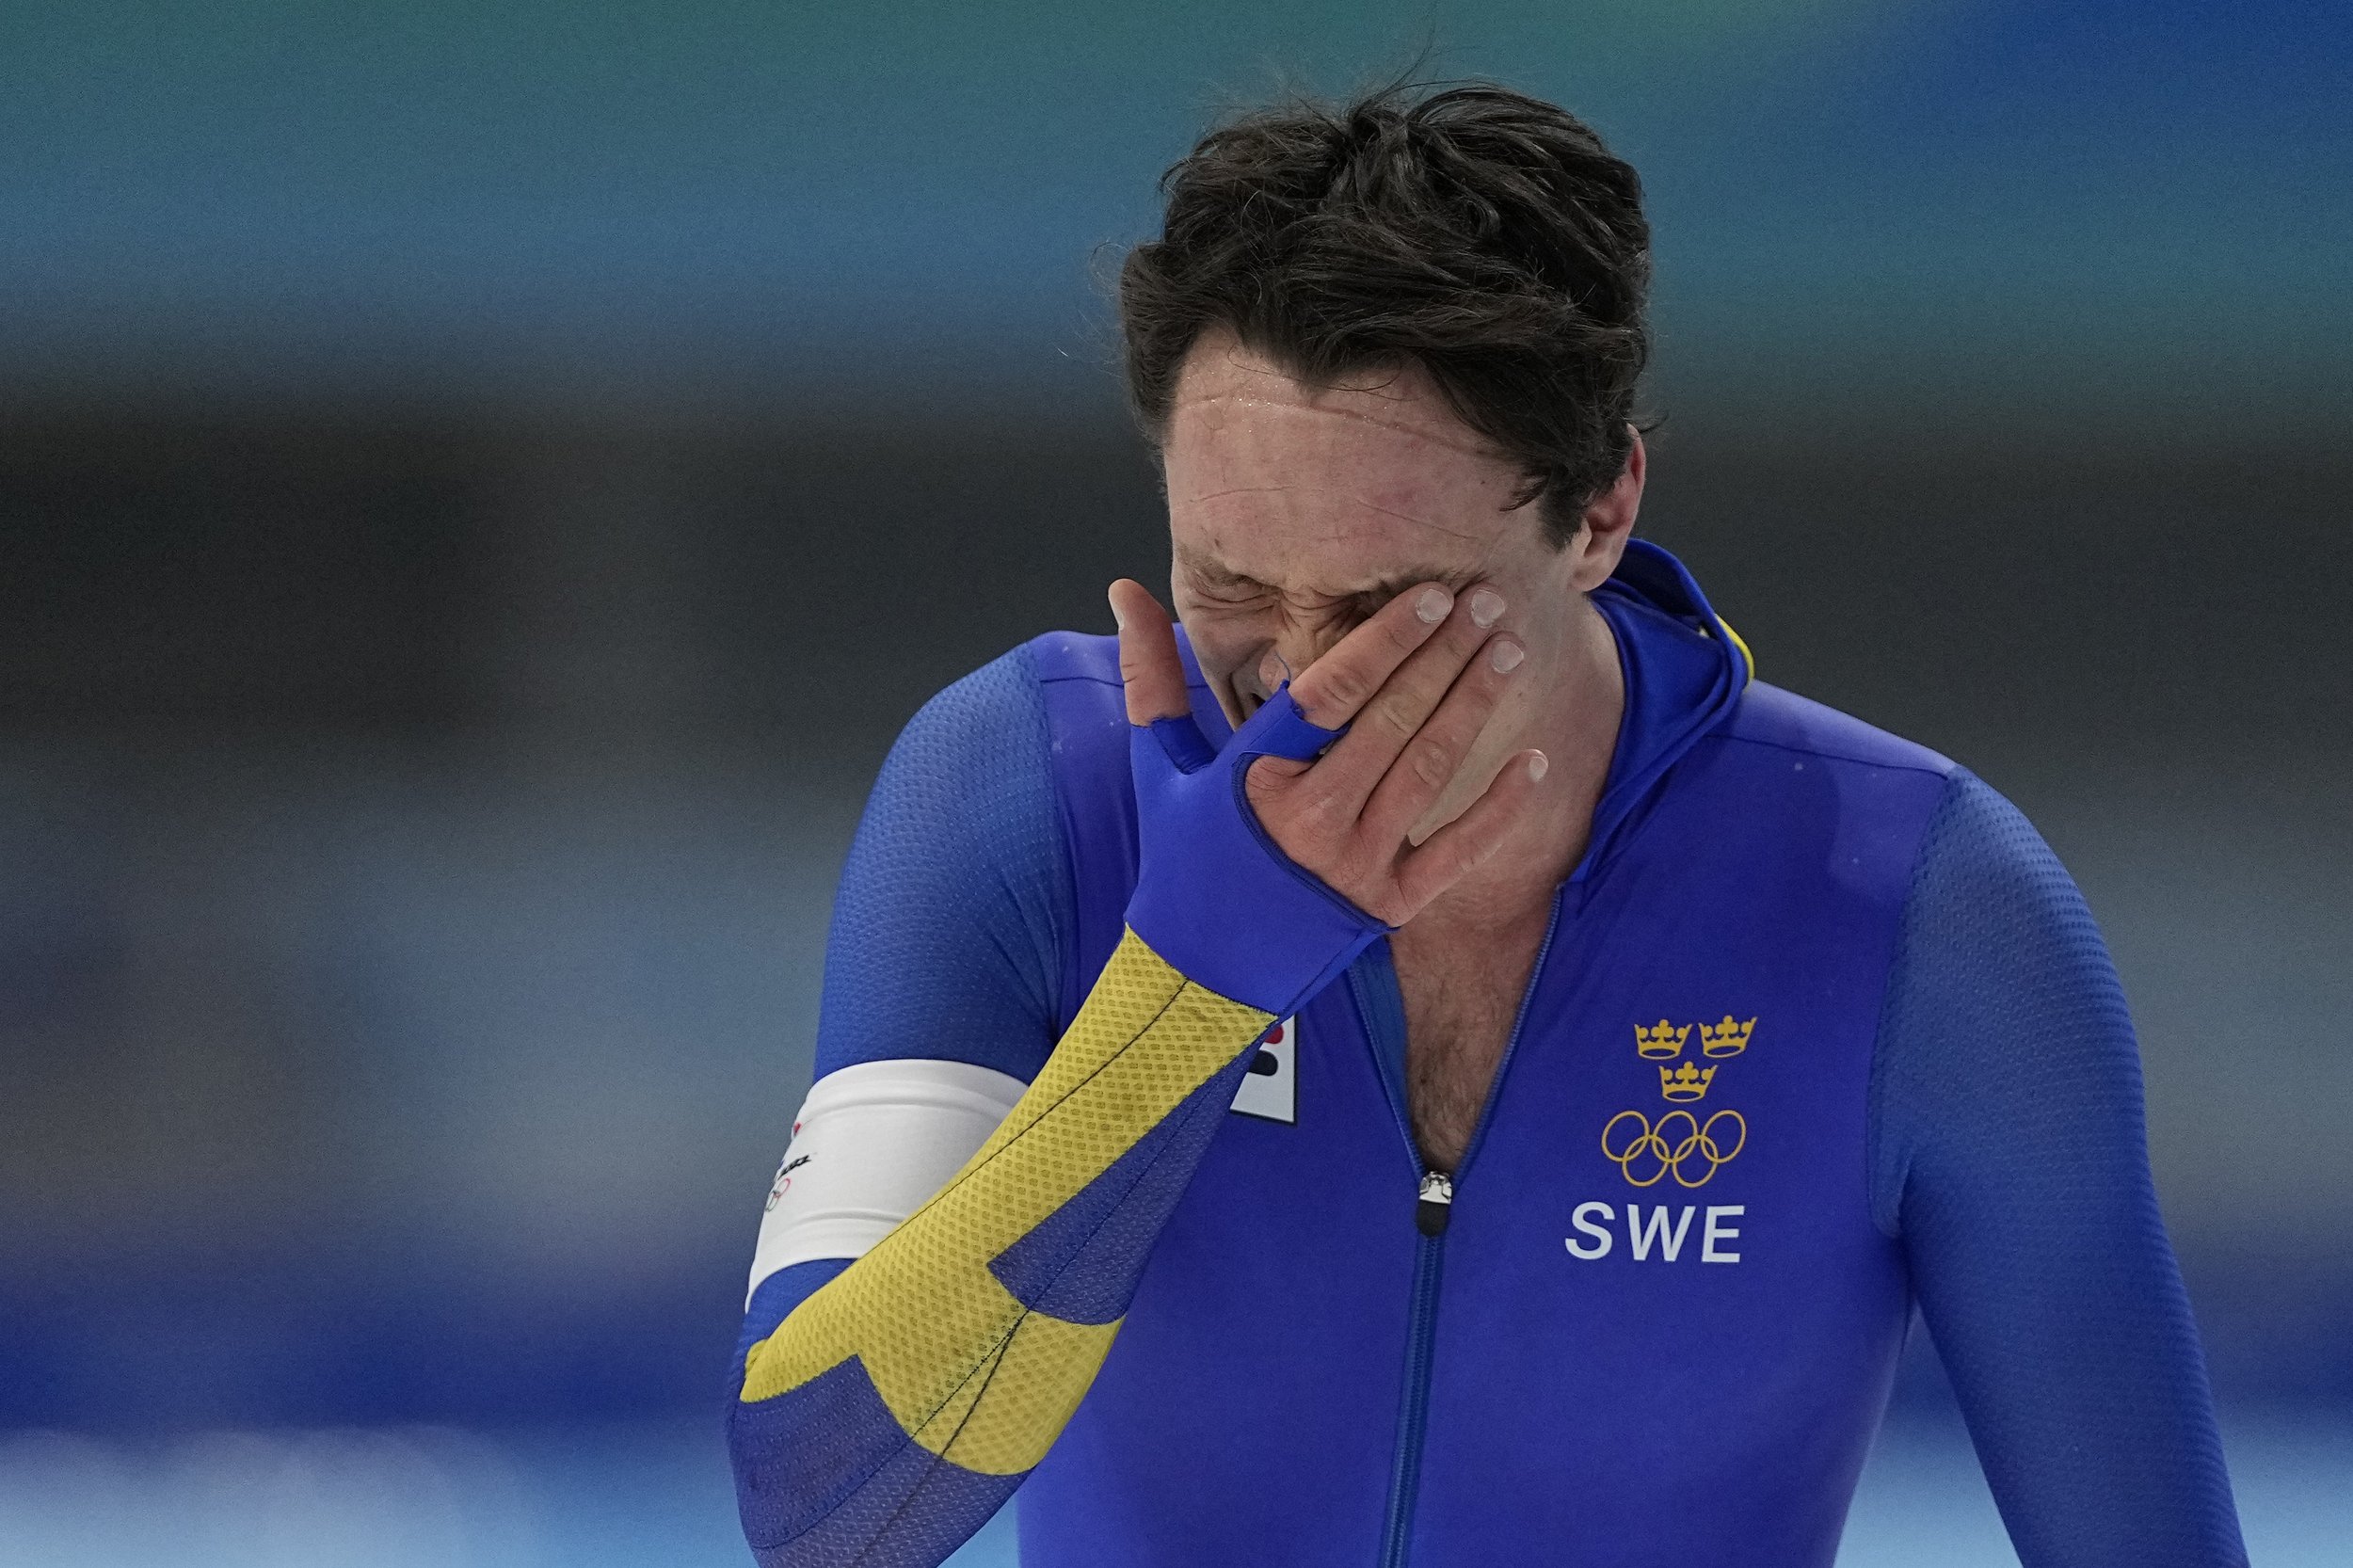  Nils van der Poel of Sweden reacts after breaking his own world record in the men's speedskating 10,000-meter race at the 2022 Winter Olympics, Friday, Feb. 11, 2022, in Beijing. (AP Photo/Ashley Landis) 